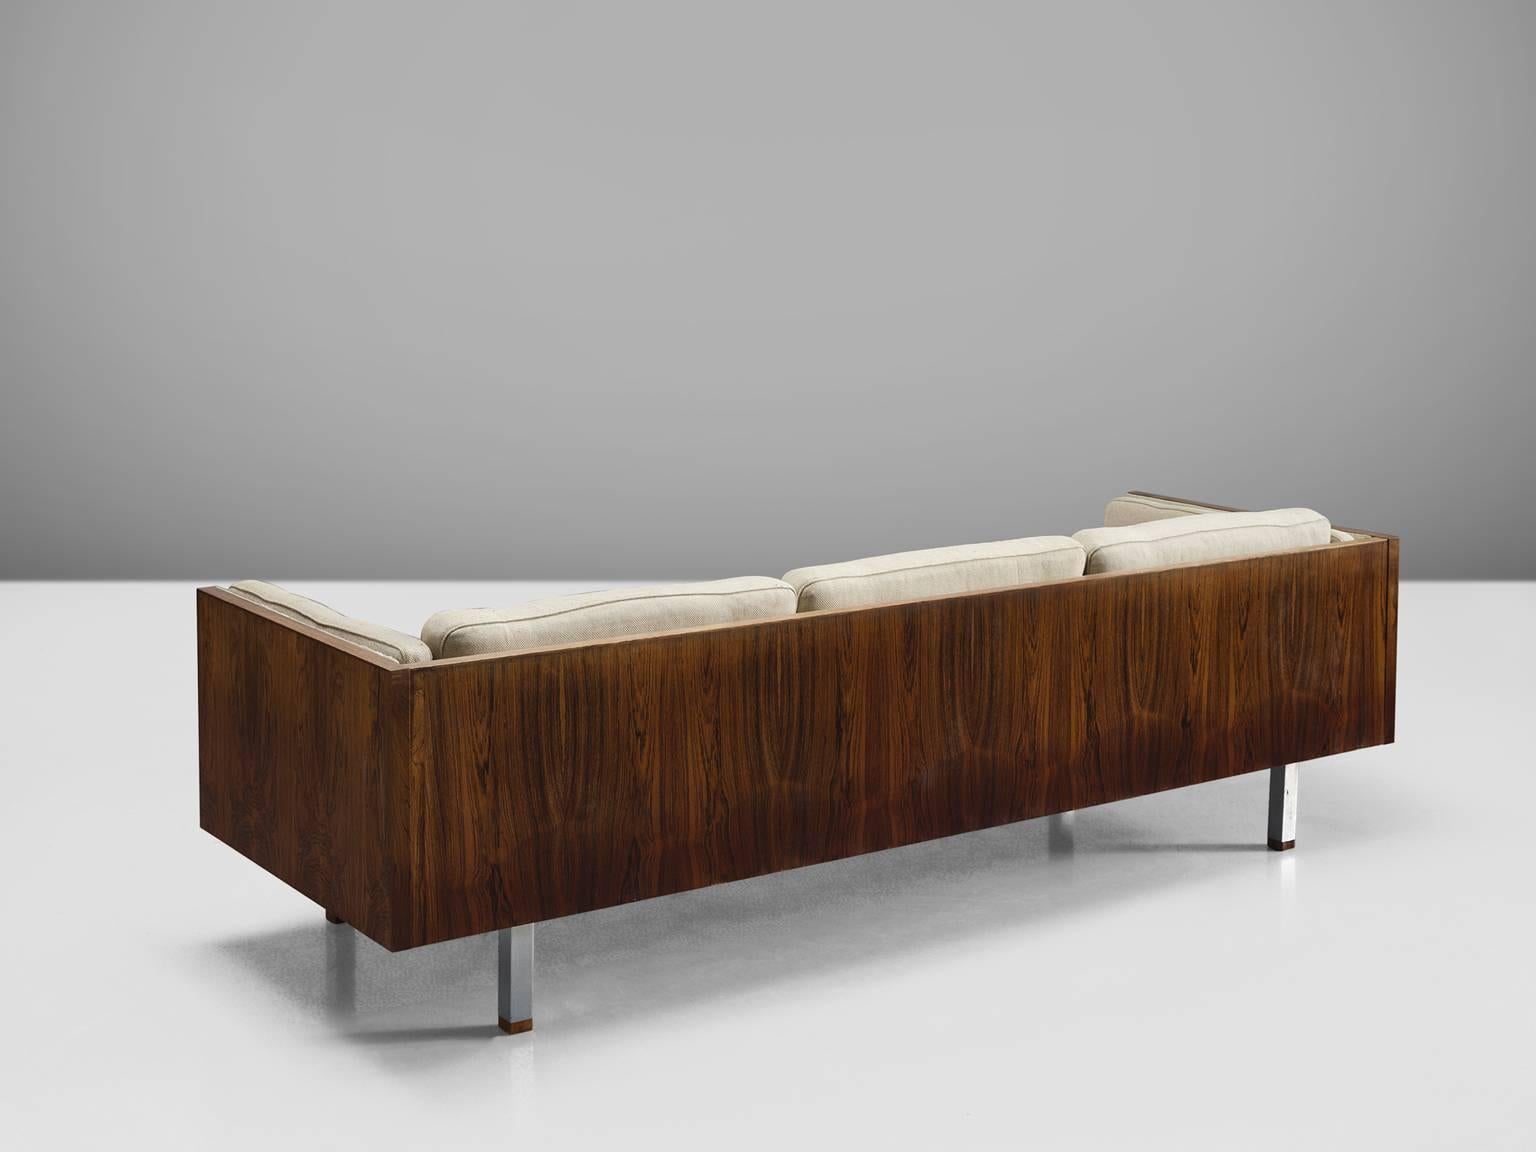 Three-seat sofa, rosewood, white fabric, steel, Denmark, 1950s

This large sofa is executed in rosewood. The set is minimalistic and modest in its design. The back and armrests are equal height and have book matched rosewood flames as a decorative